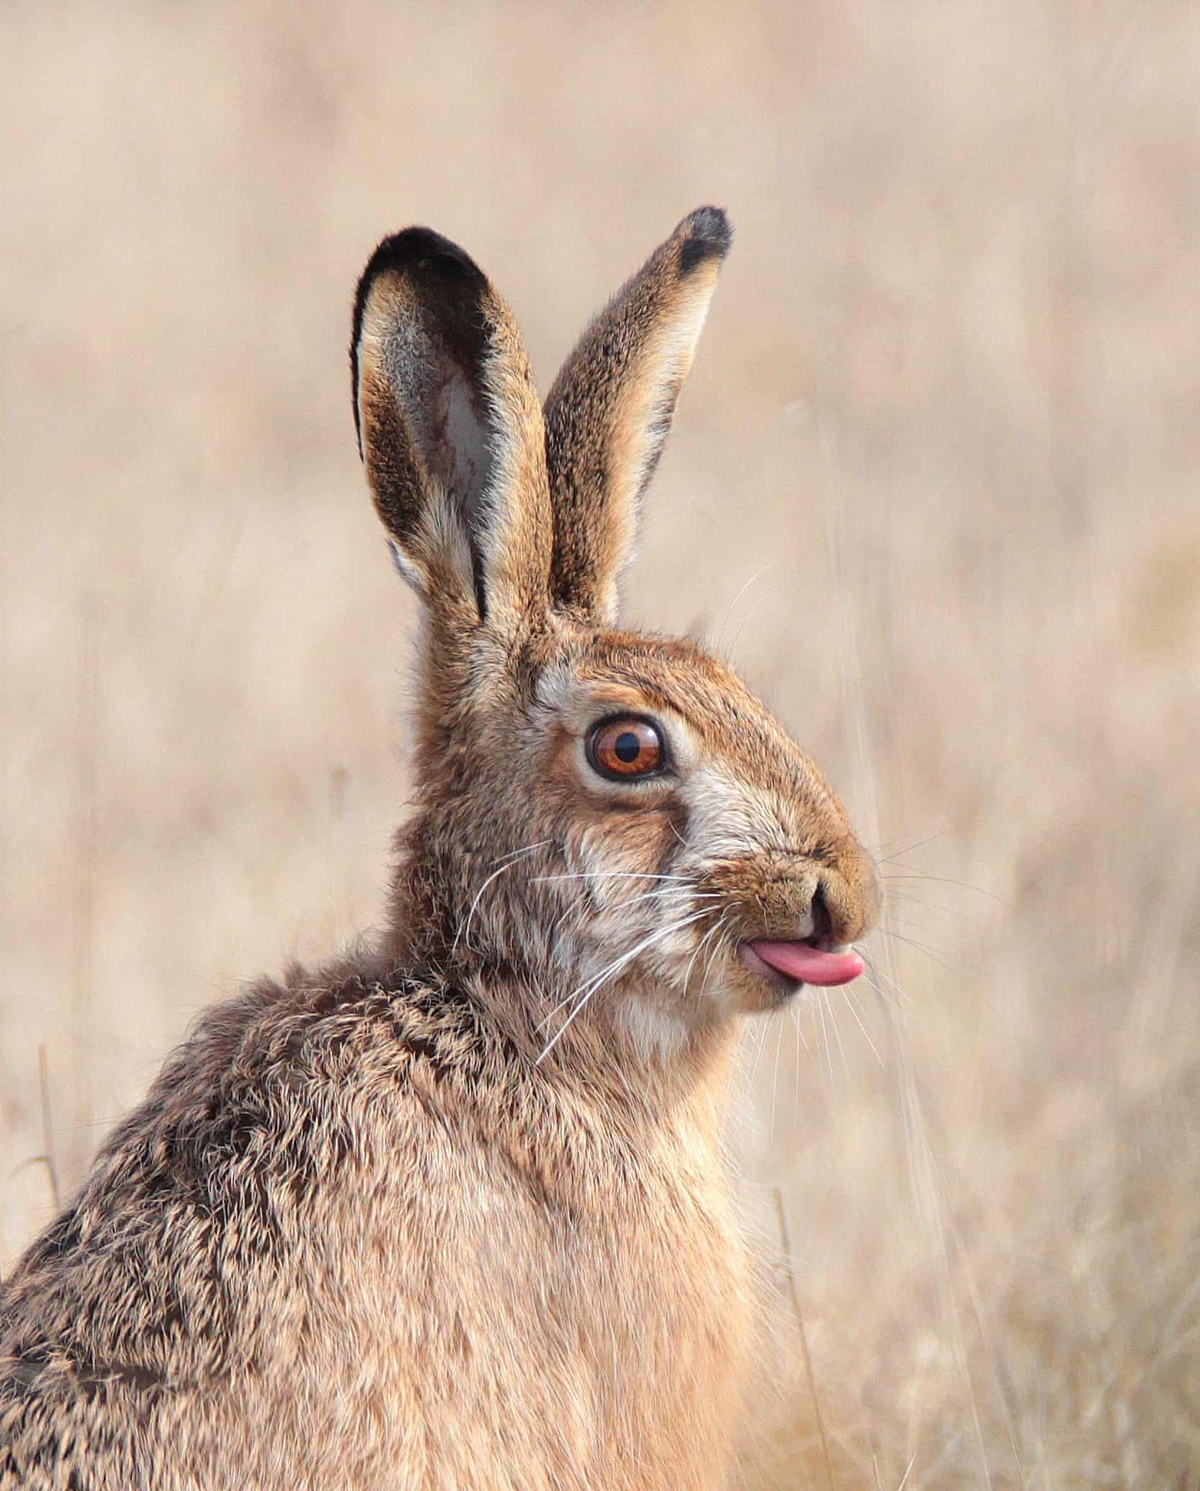 A photo snapped by Cristo Pihlamäe tops the natural world and wildlife category. “Little Kiss” is an amusing picture of a hare looking out into the field as it sticks out its tongue.